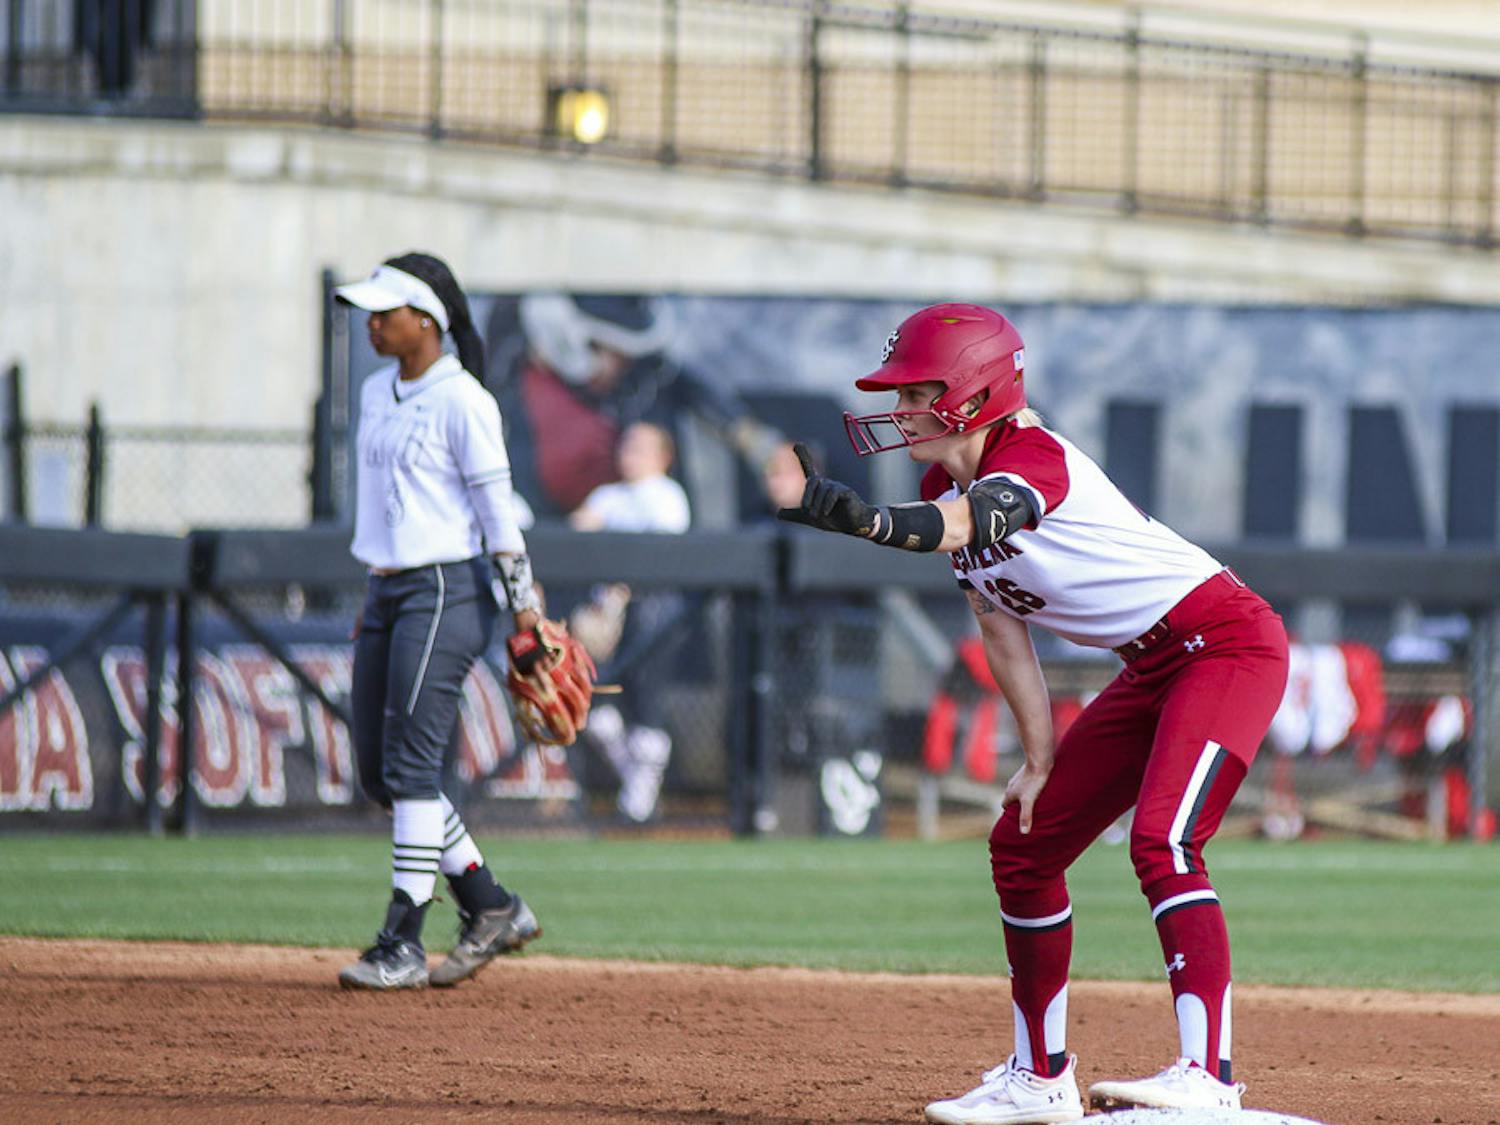 Junior infielder Riley Blampied signals to her teammates during the match against Western Kentucky University at Beckham Field on Feb.19, 2023. The Gamecocks defeated the Hilltoppers 11-2.&nbsp;